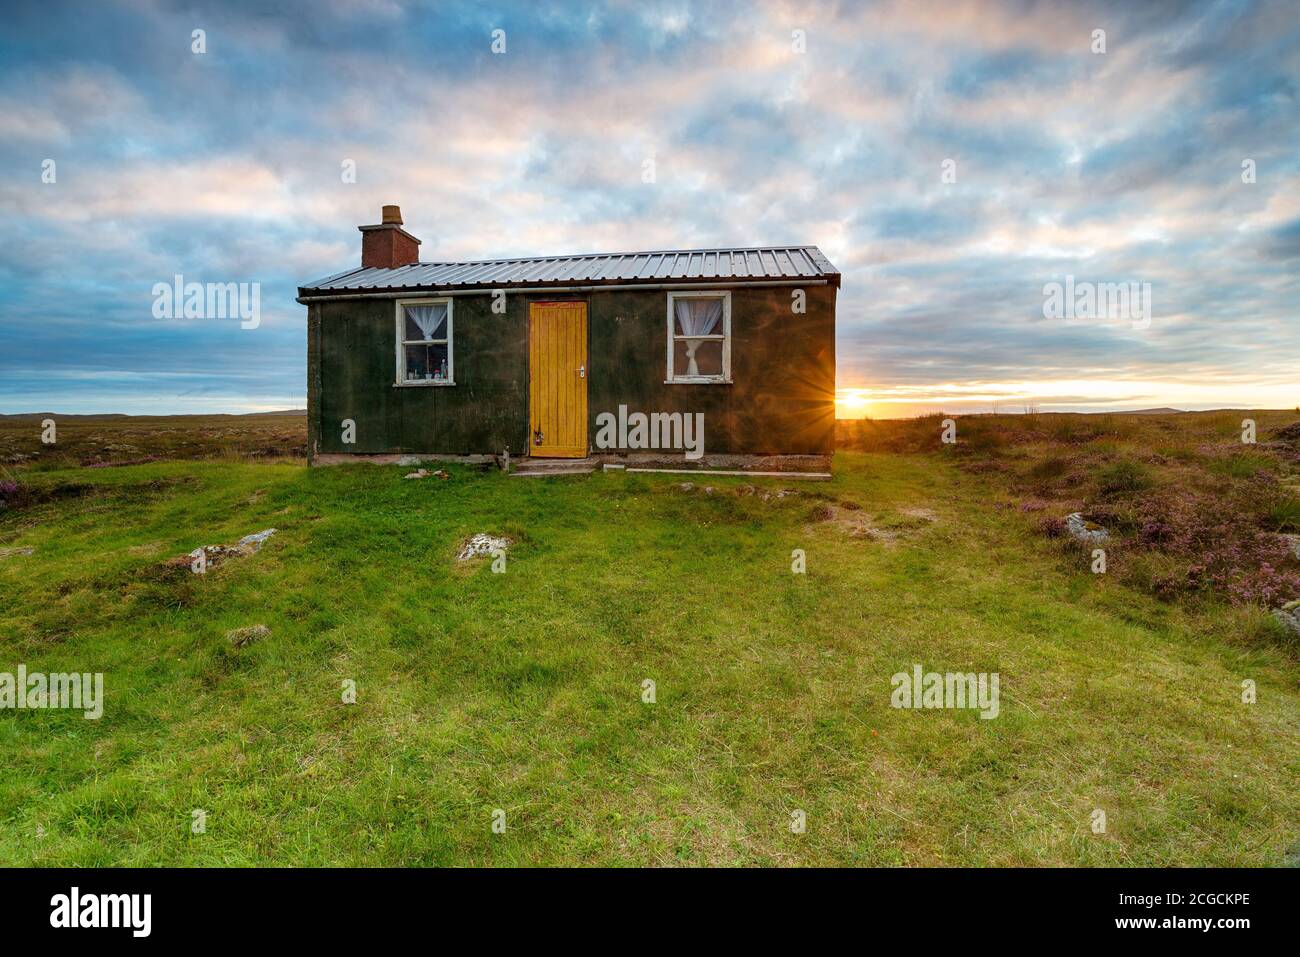 Sunset over a shieling hut on Pentland Road near Stornoway on the Ilse of Lewis in the Western Isles of Scotland Stock Photo